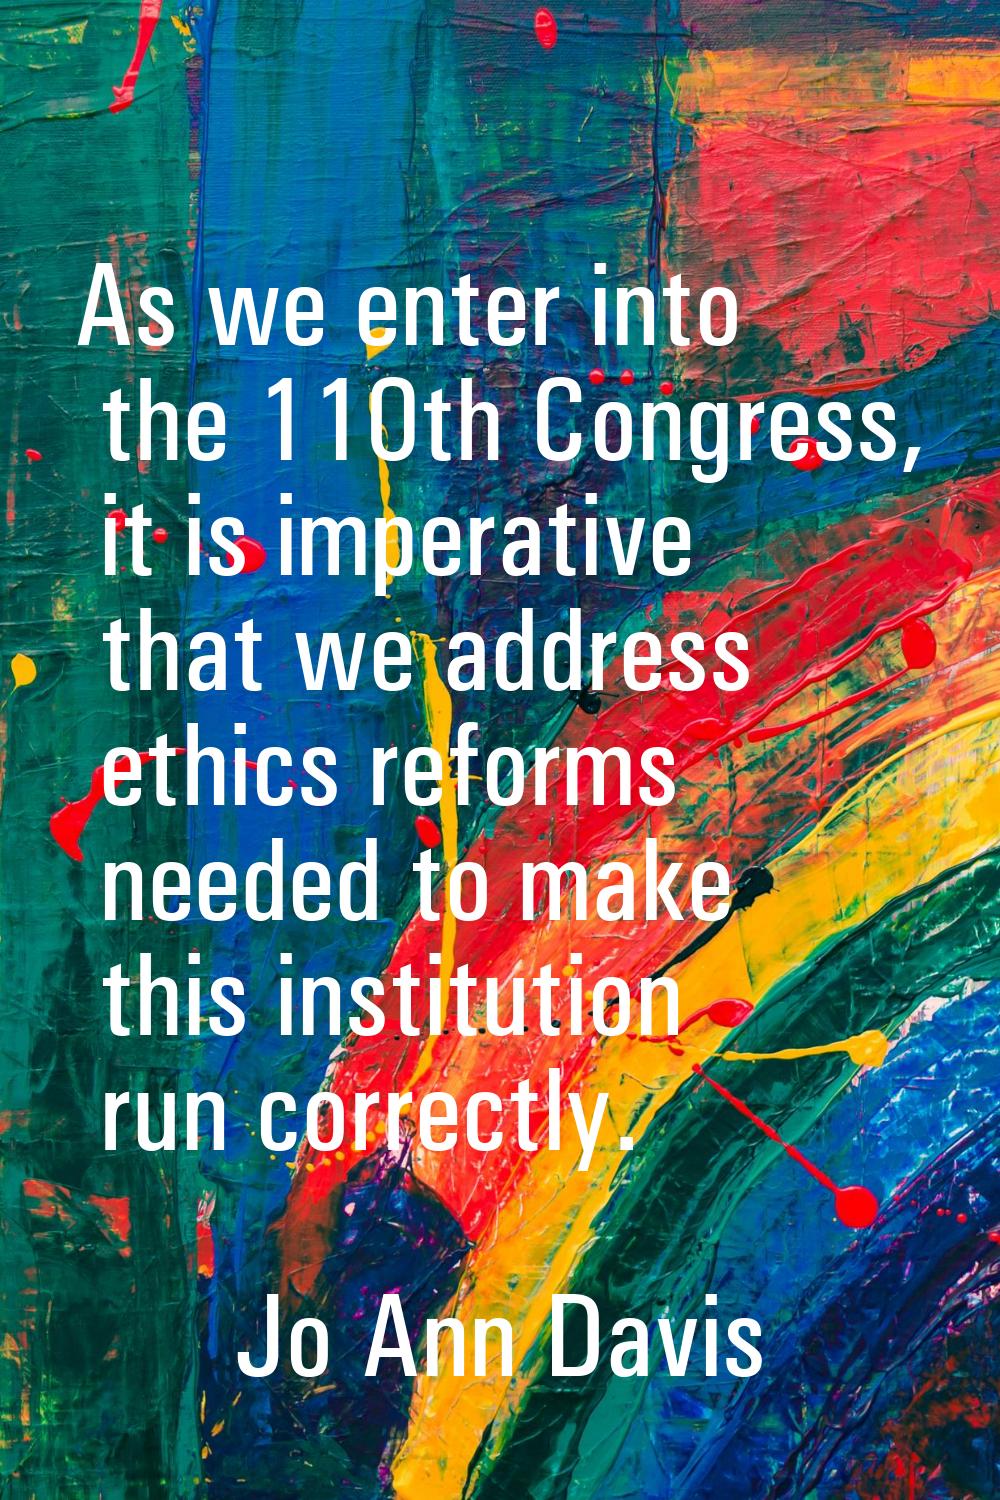 As we enter into the 110th Congress, it is imperative that we address ethics reforms needed to make